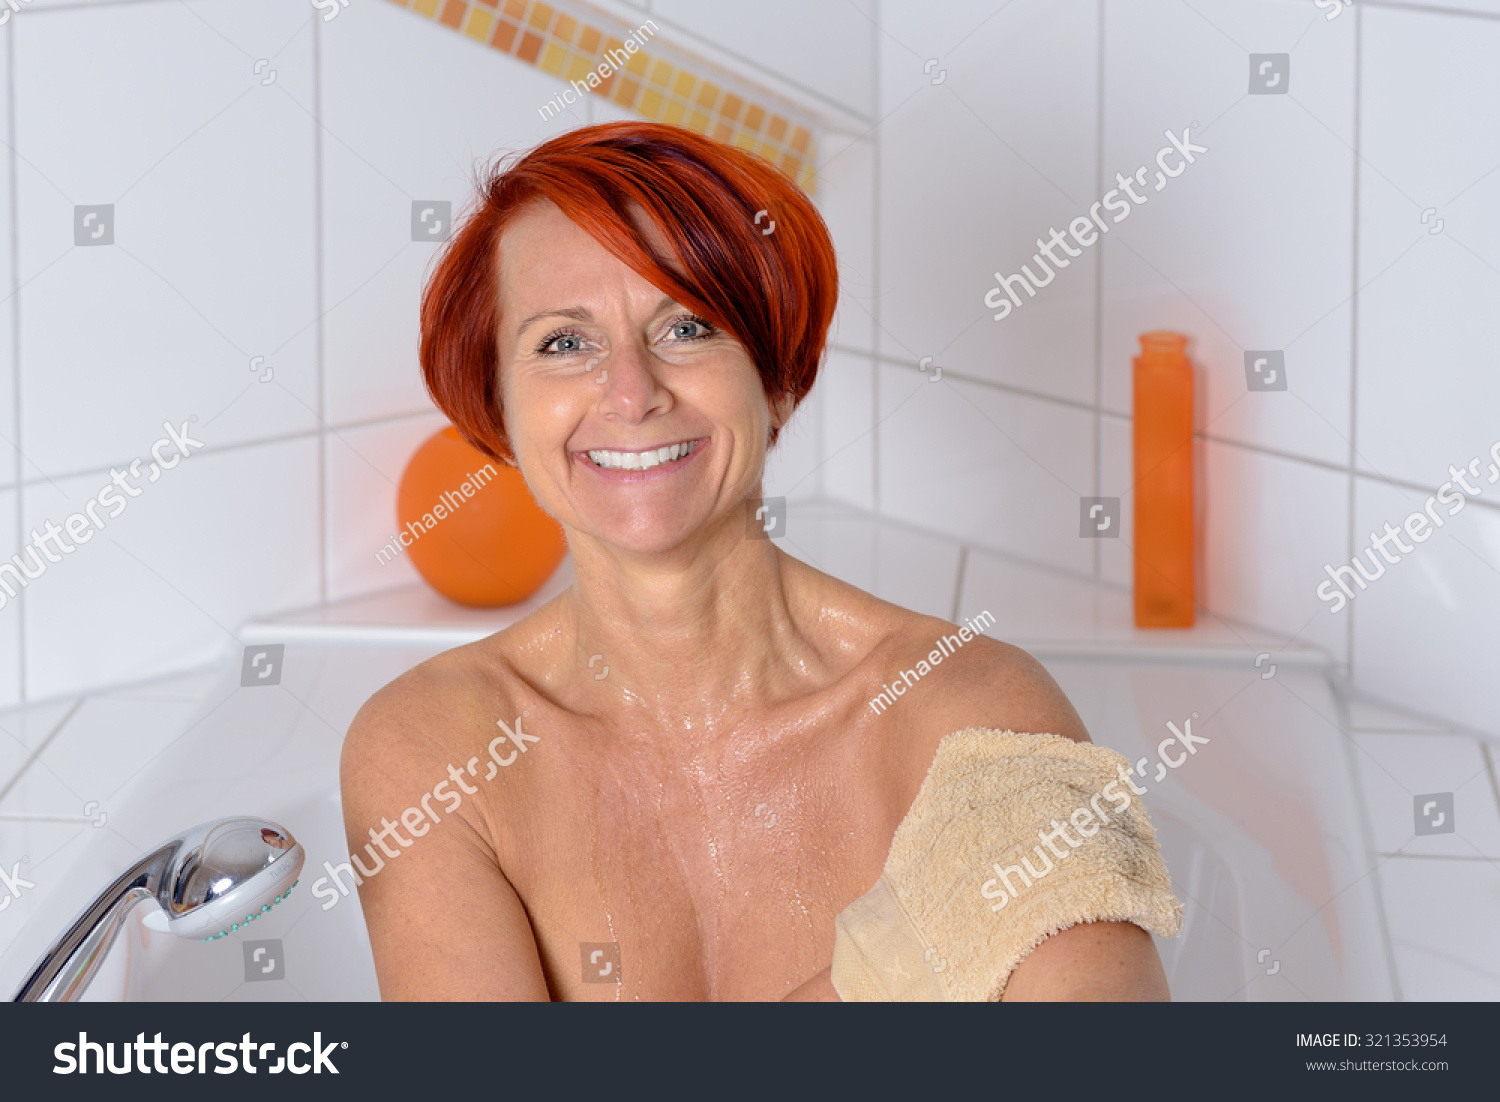 Middle aged redhead